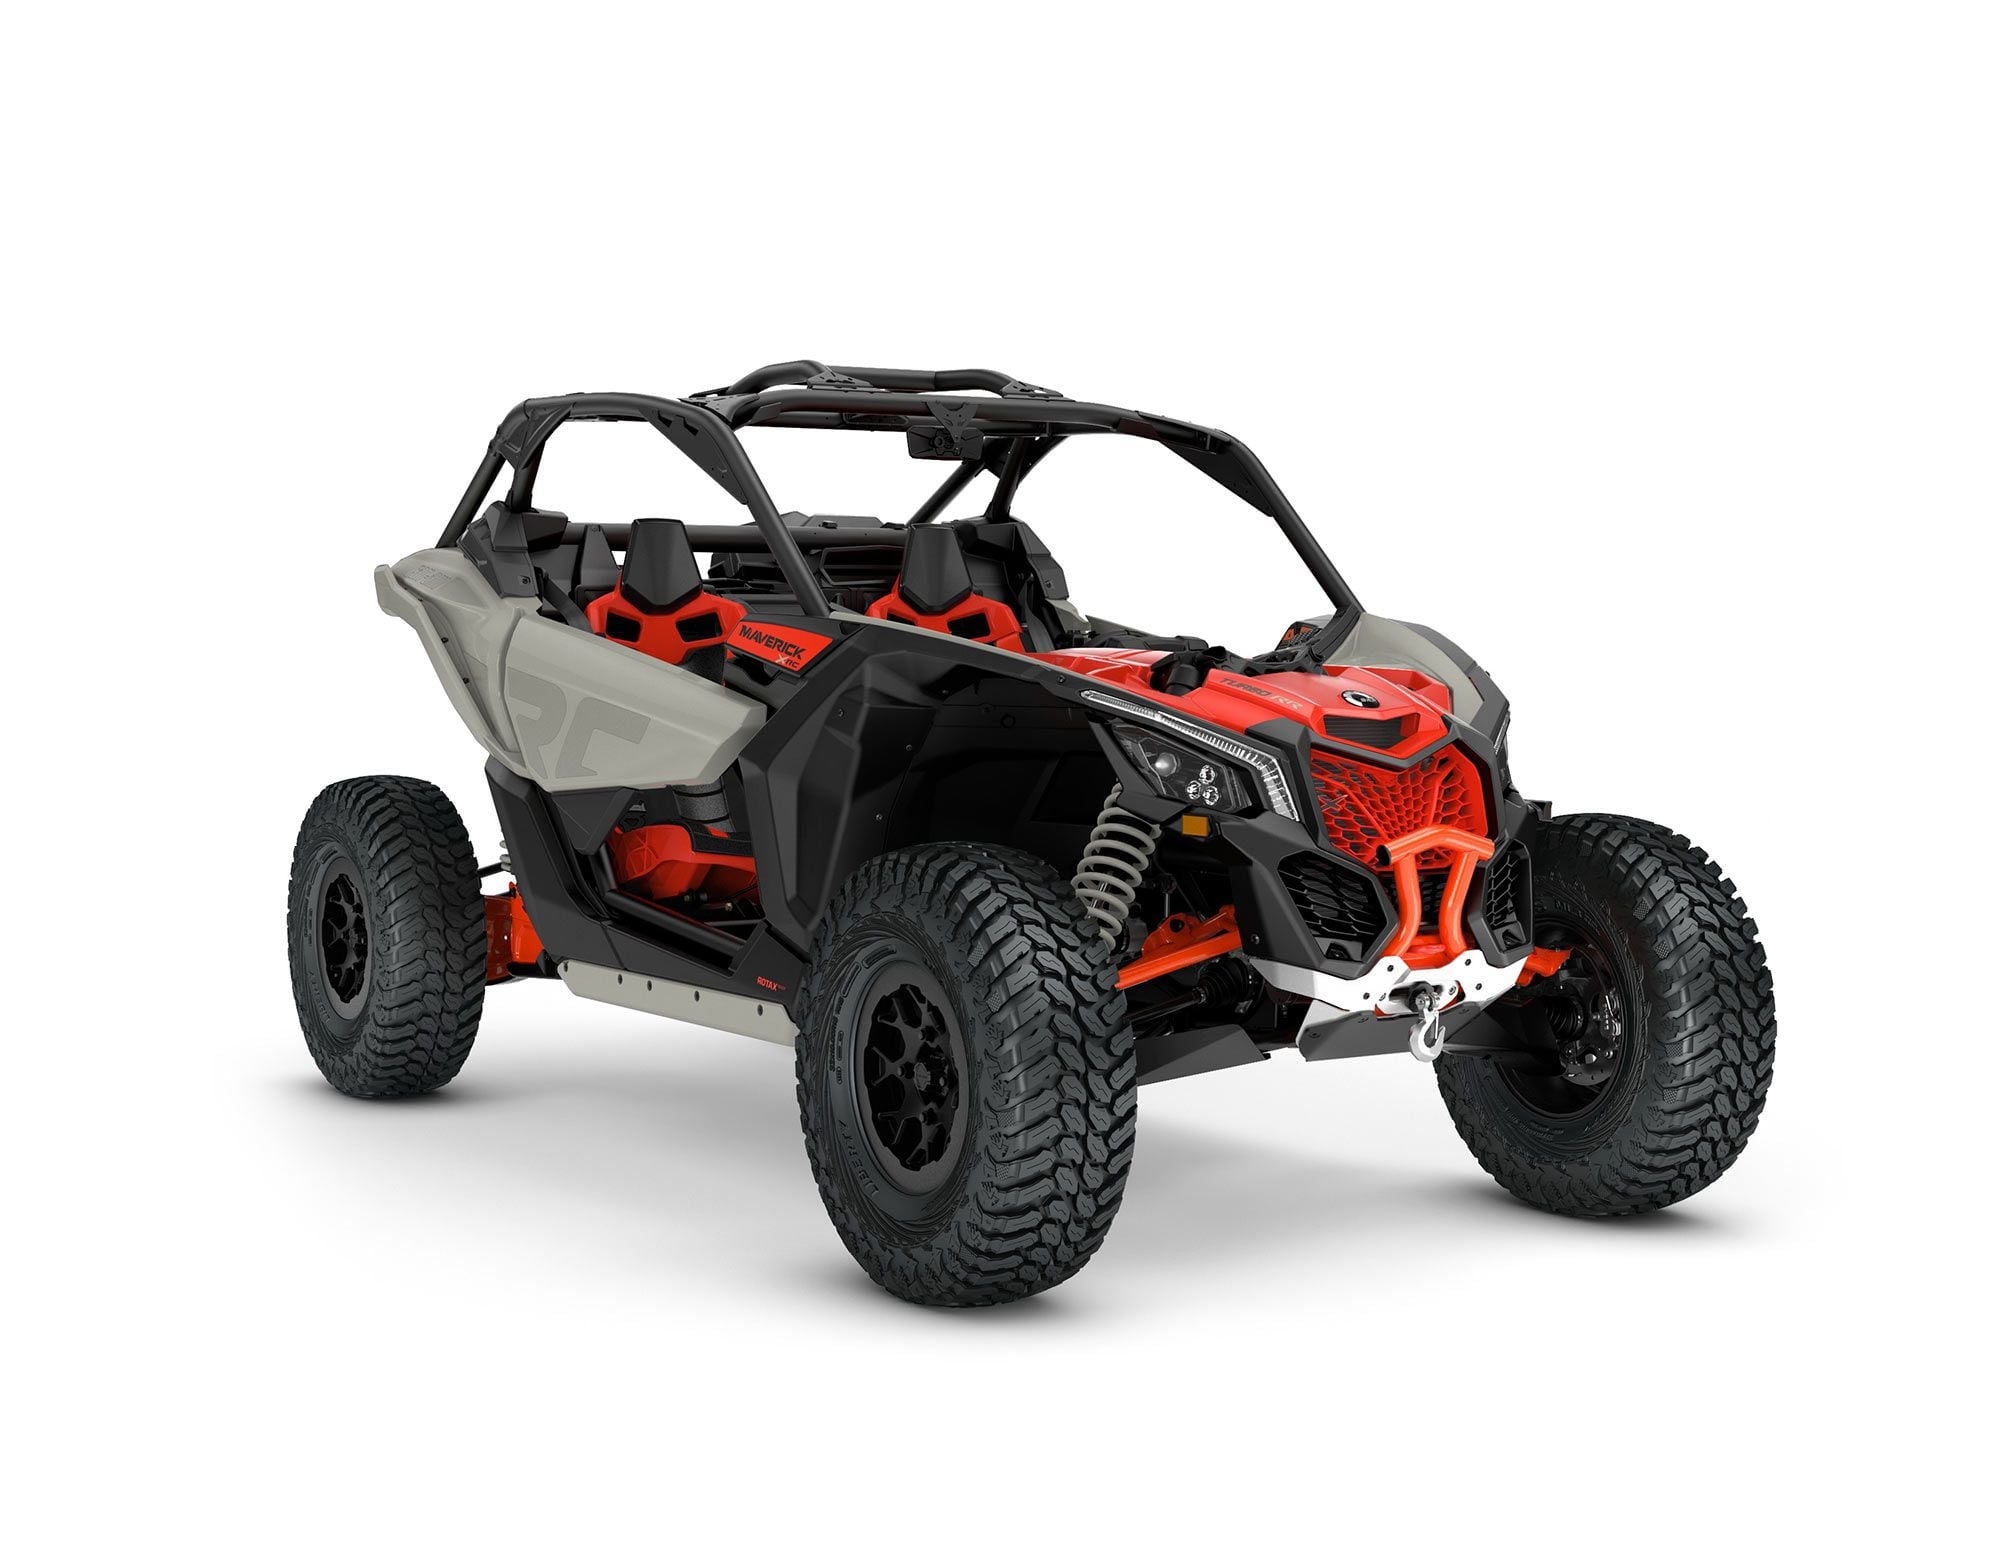 2022 Can-Am Maverick X3 X RC Turbo RR 64 front view in Chalk Gray and Magma Red color.